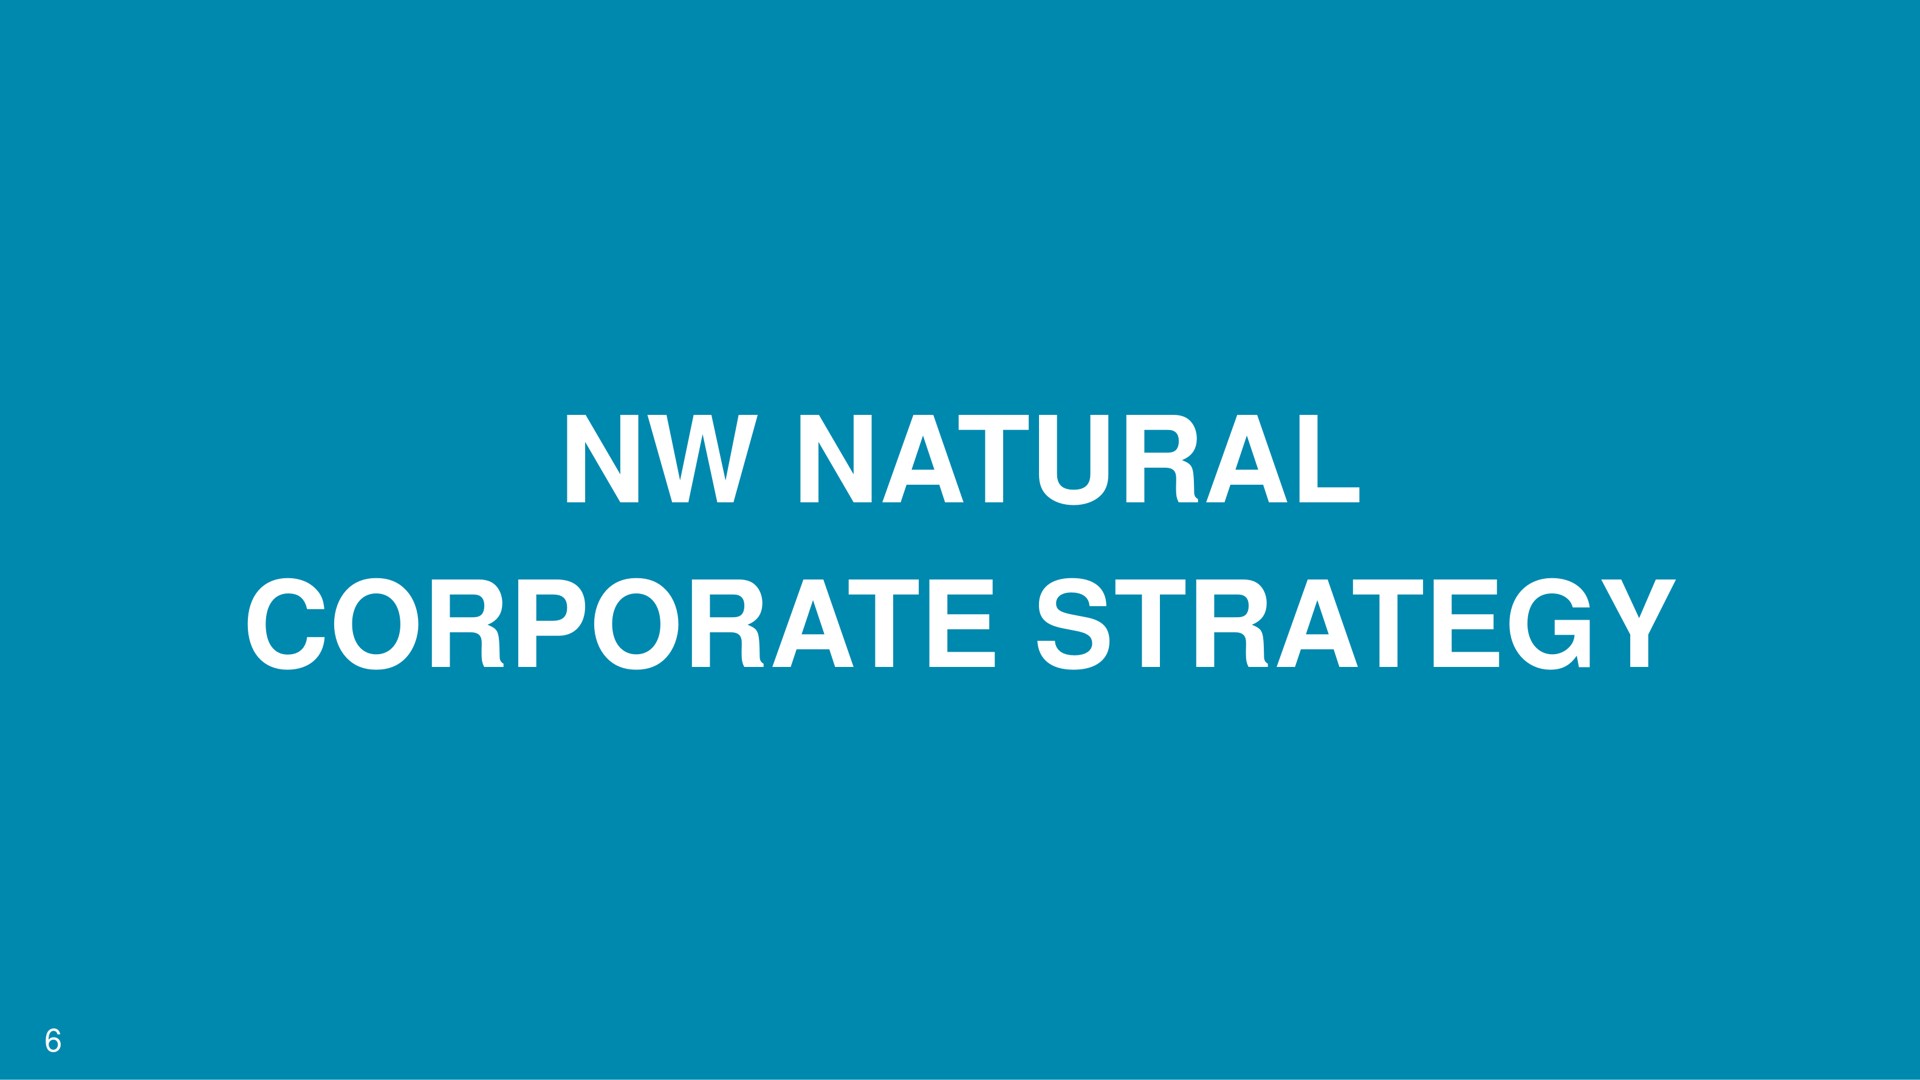 natural corporate strategy | NW Natural Holdings